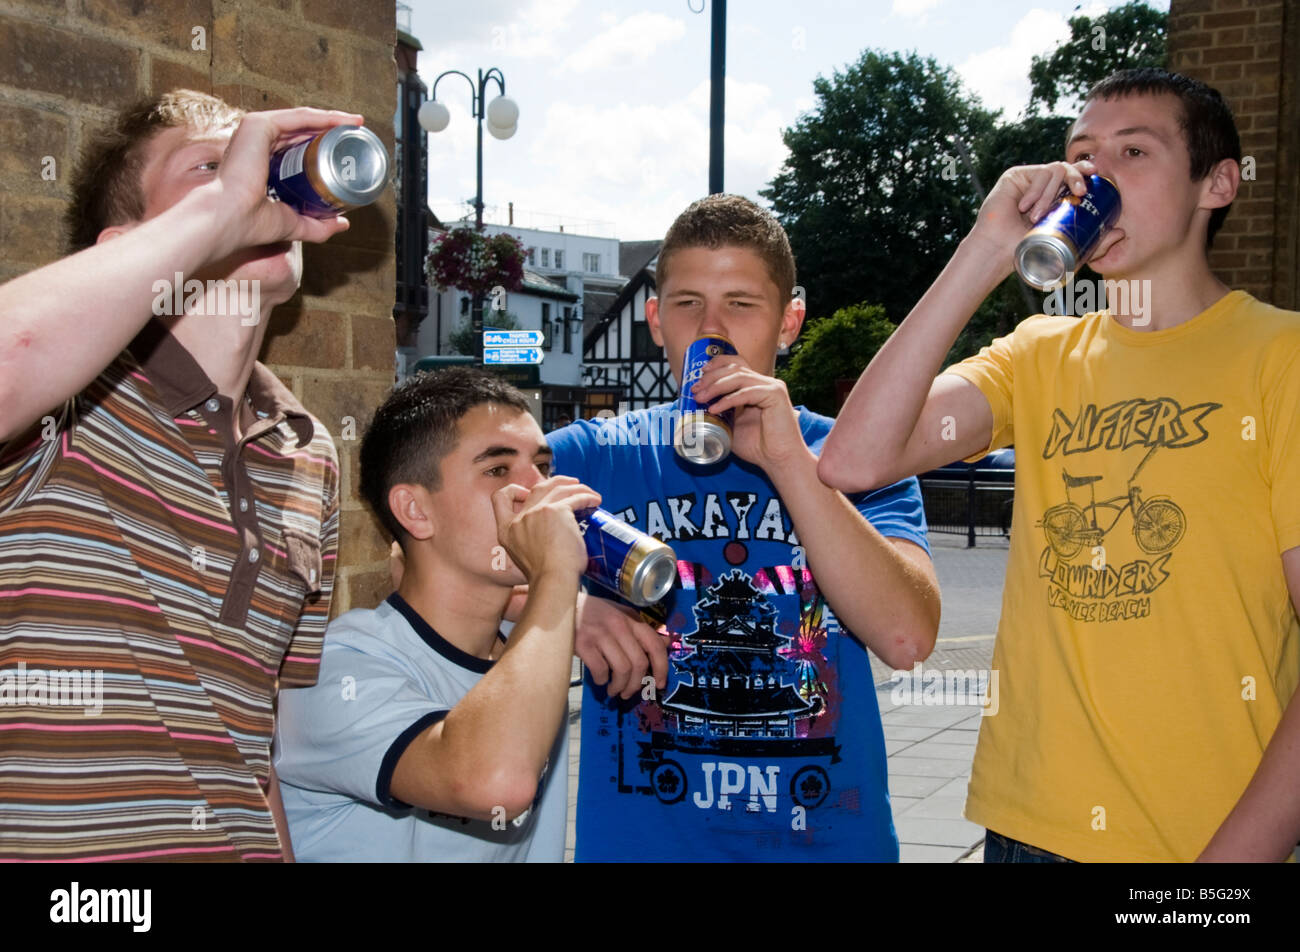 group of teenage boys drinking cans of beer Stock Photo